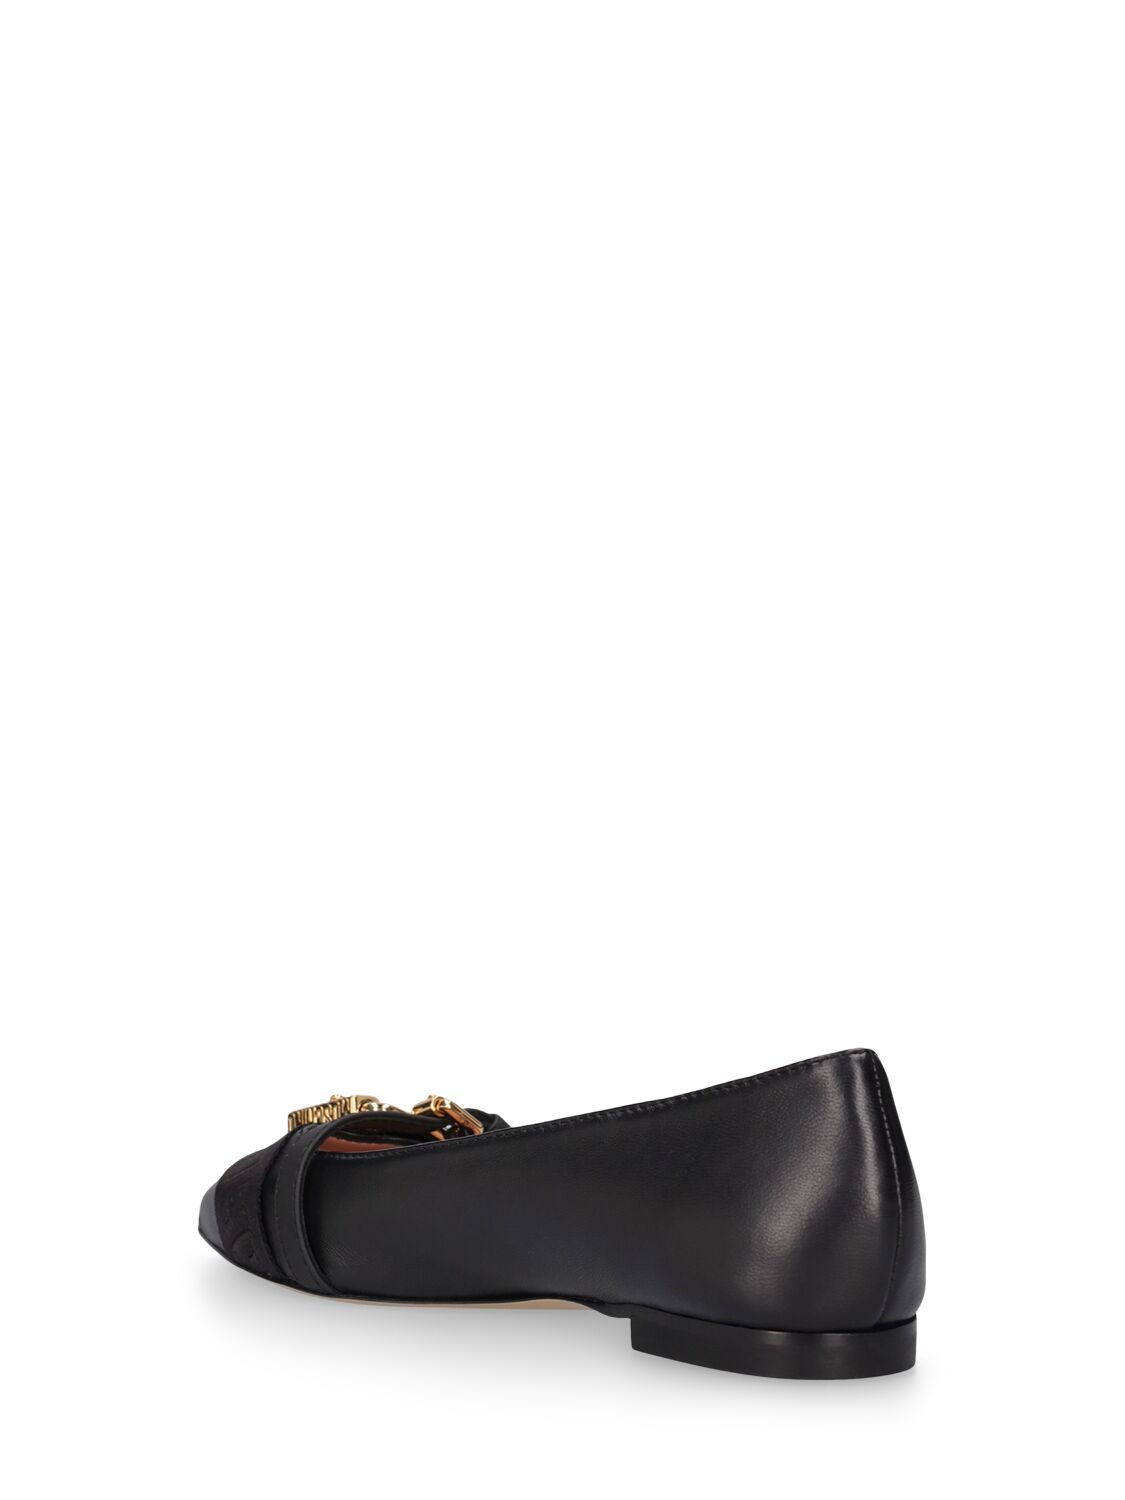 Shop Moschino 10mm Leather Ballerina Flats In Black